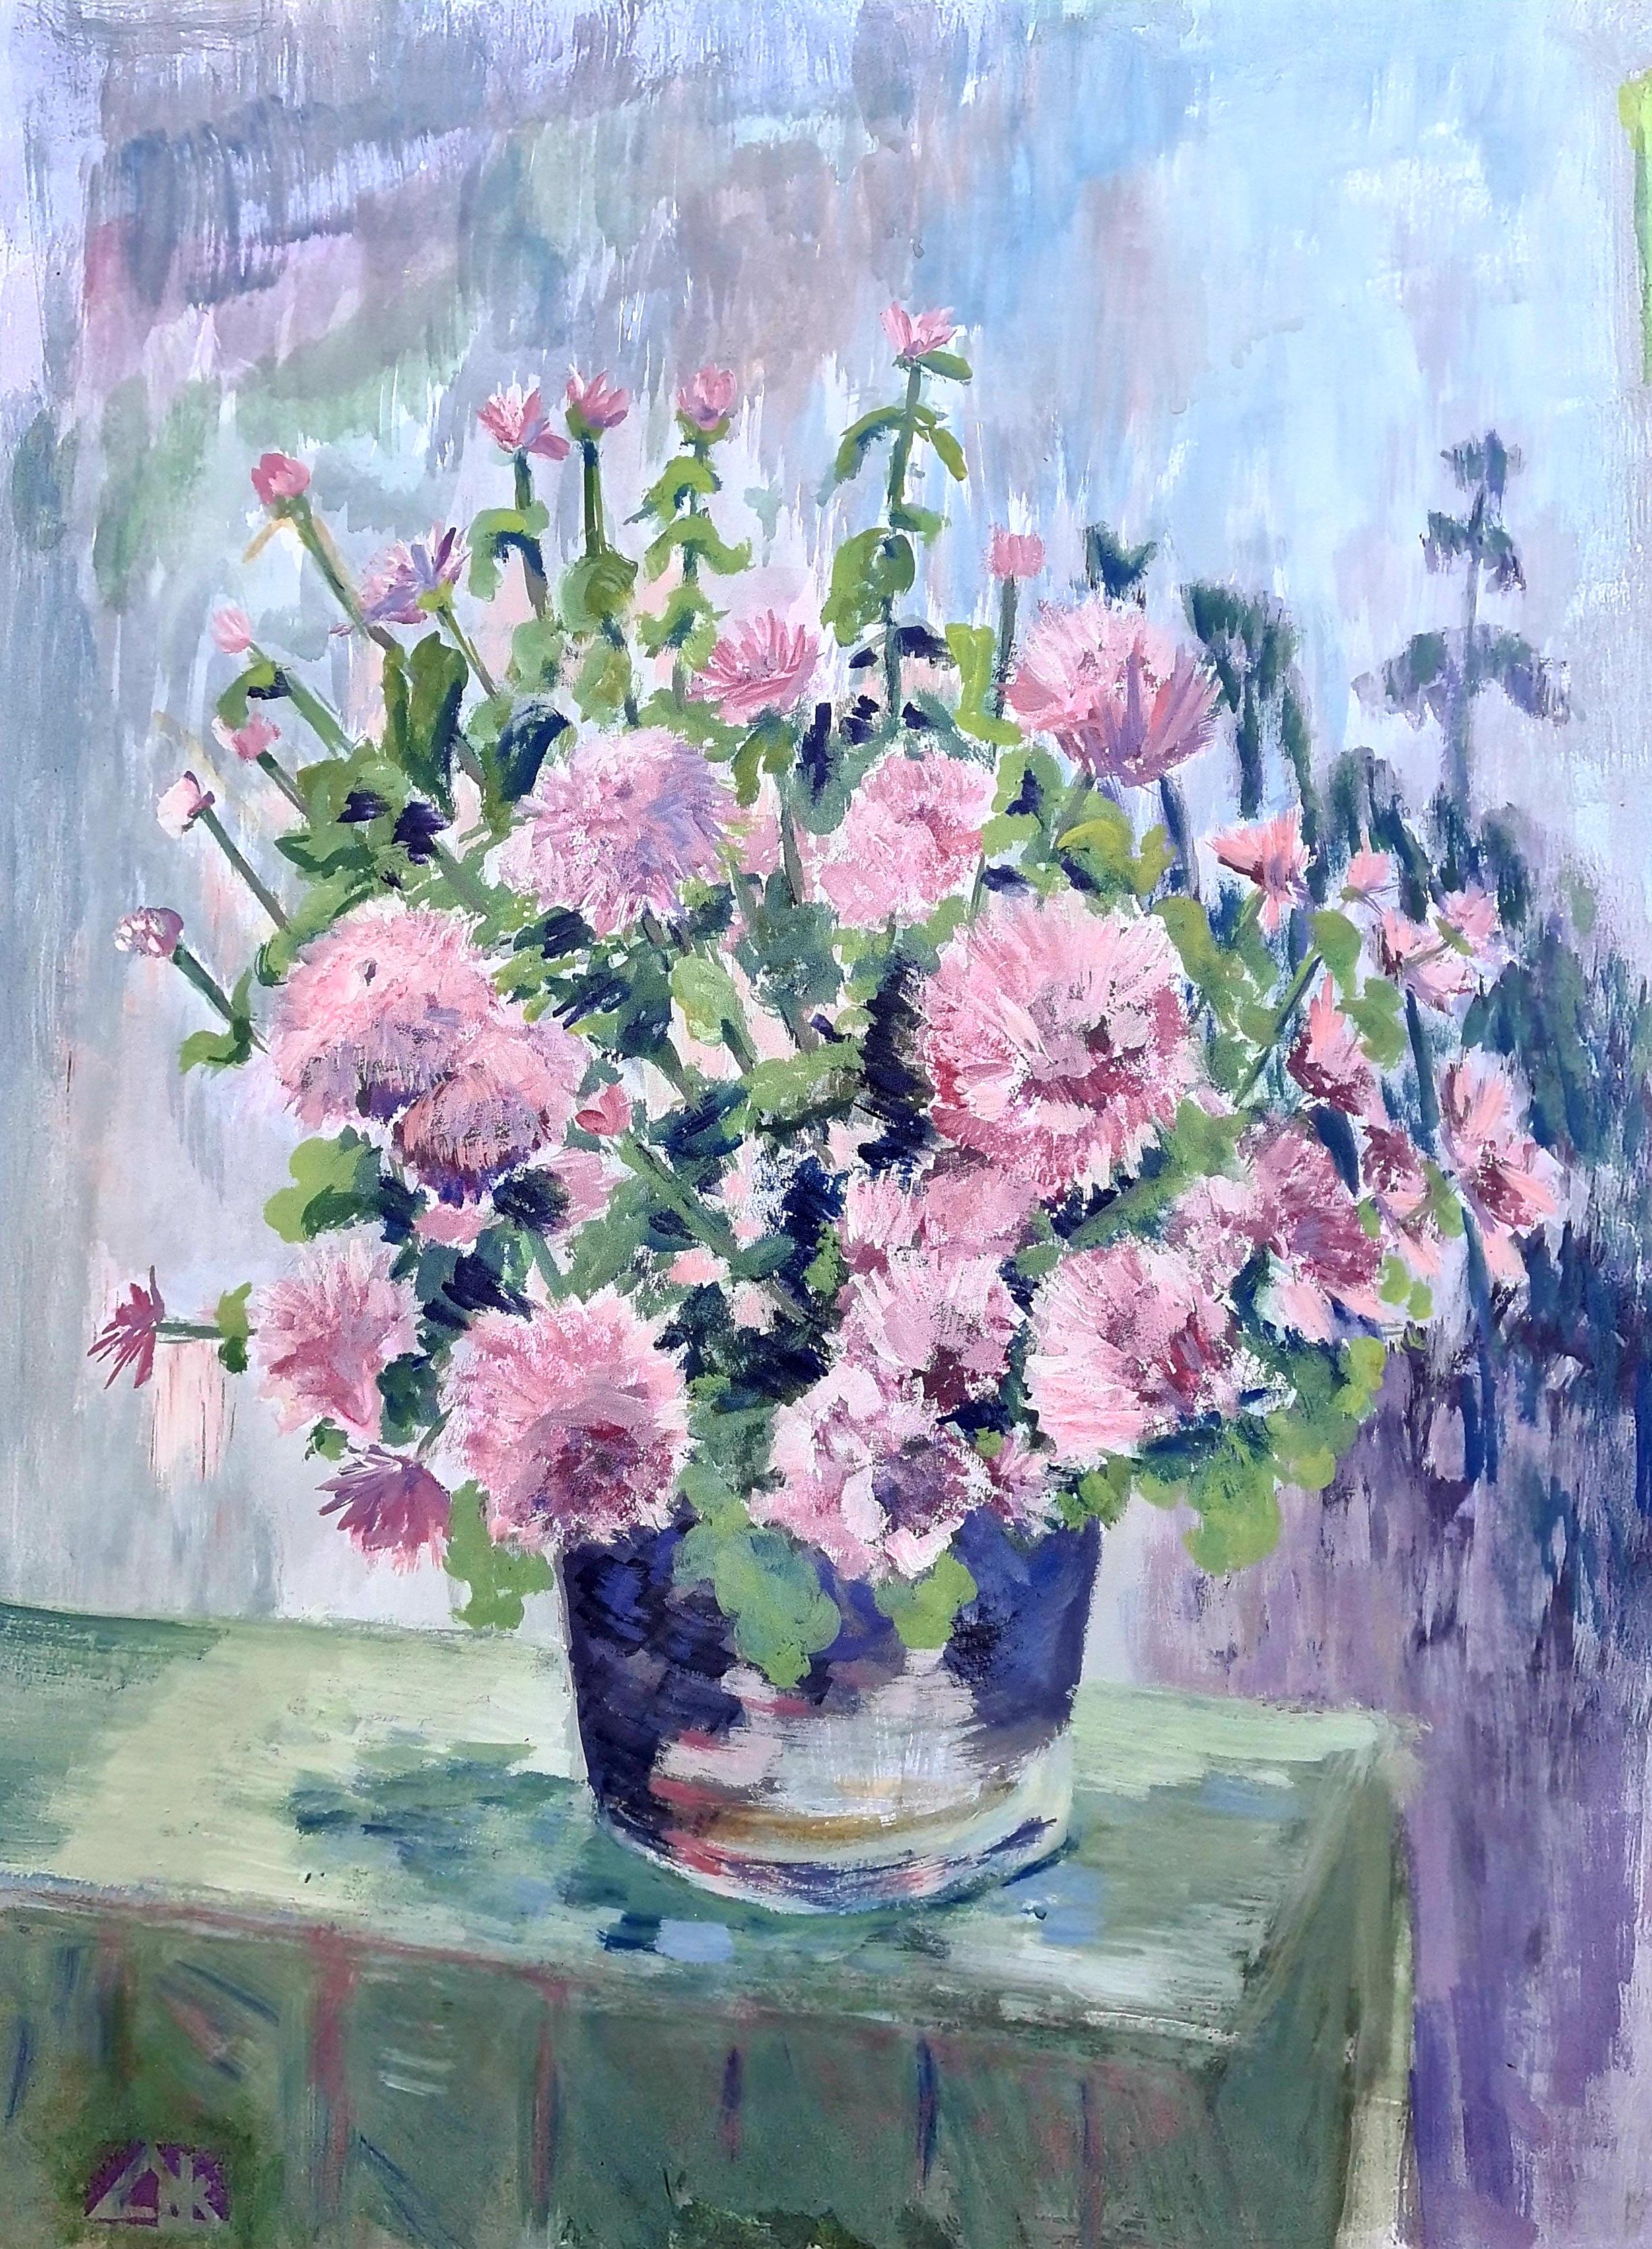 Unknown Still-Life - Pink Abundance, 'Oillets', Still life of Flowers In a Vase, Homage a Manet.